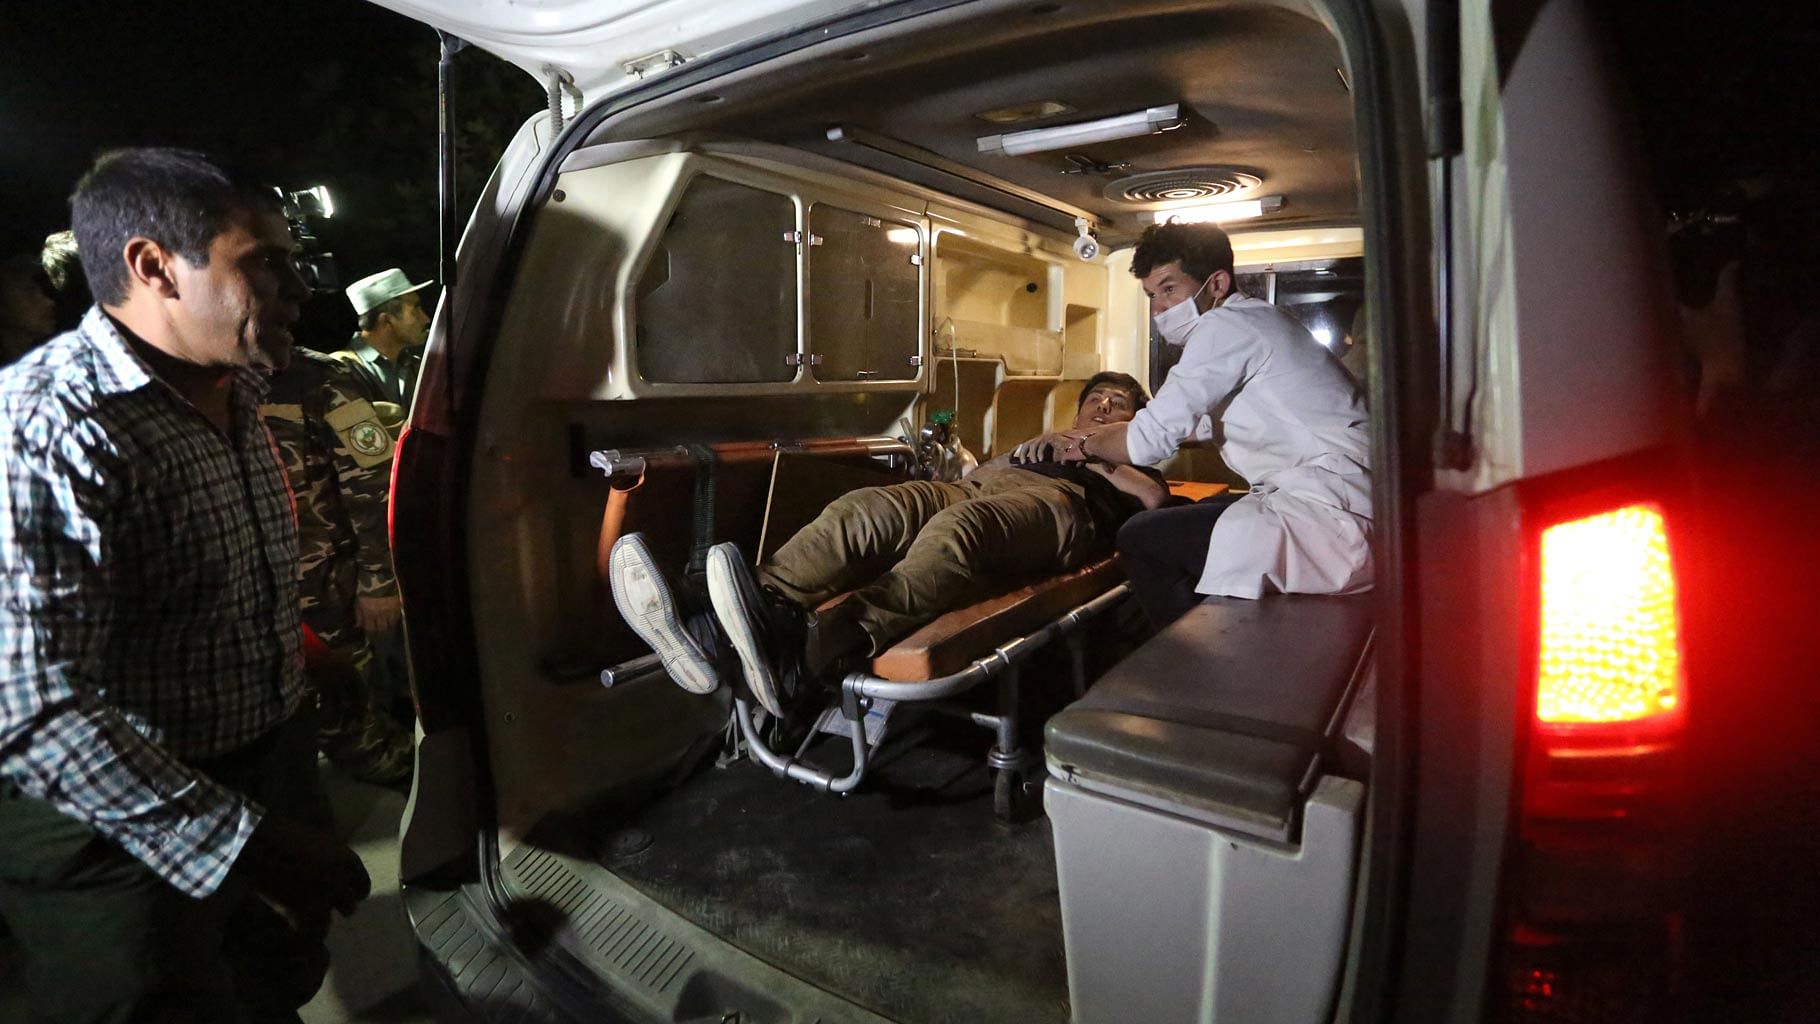 A man wounded is assisted in an ambulance after a complex Taliban attack on the campus of theAmerican University in the Afghan capital Kabul on Wednesday. (Photo: AP)